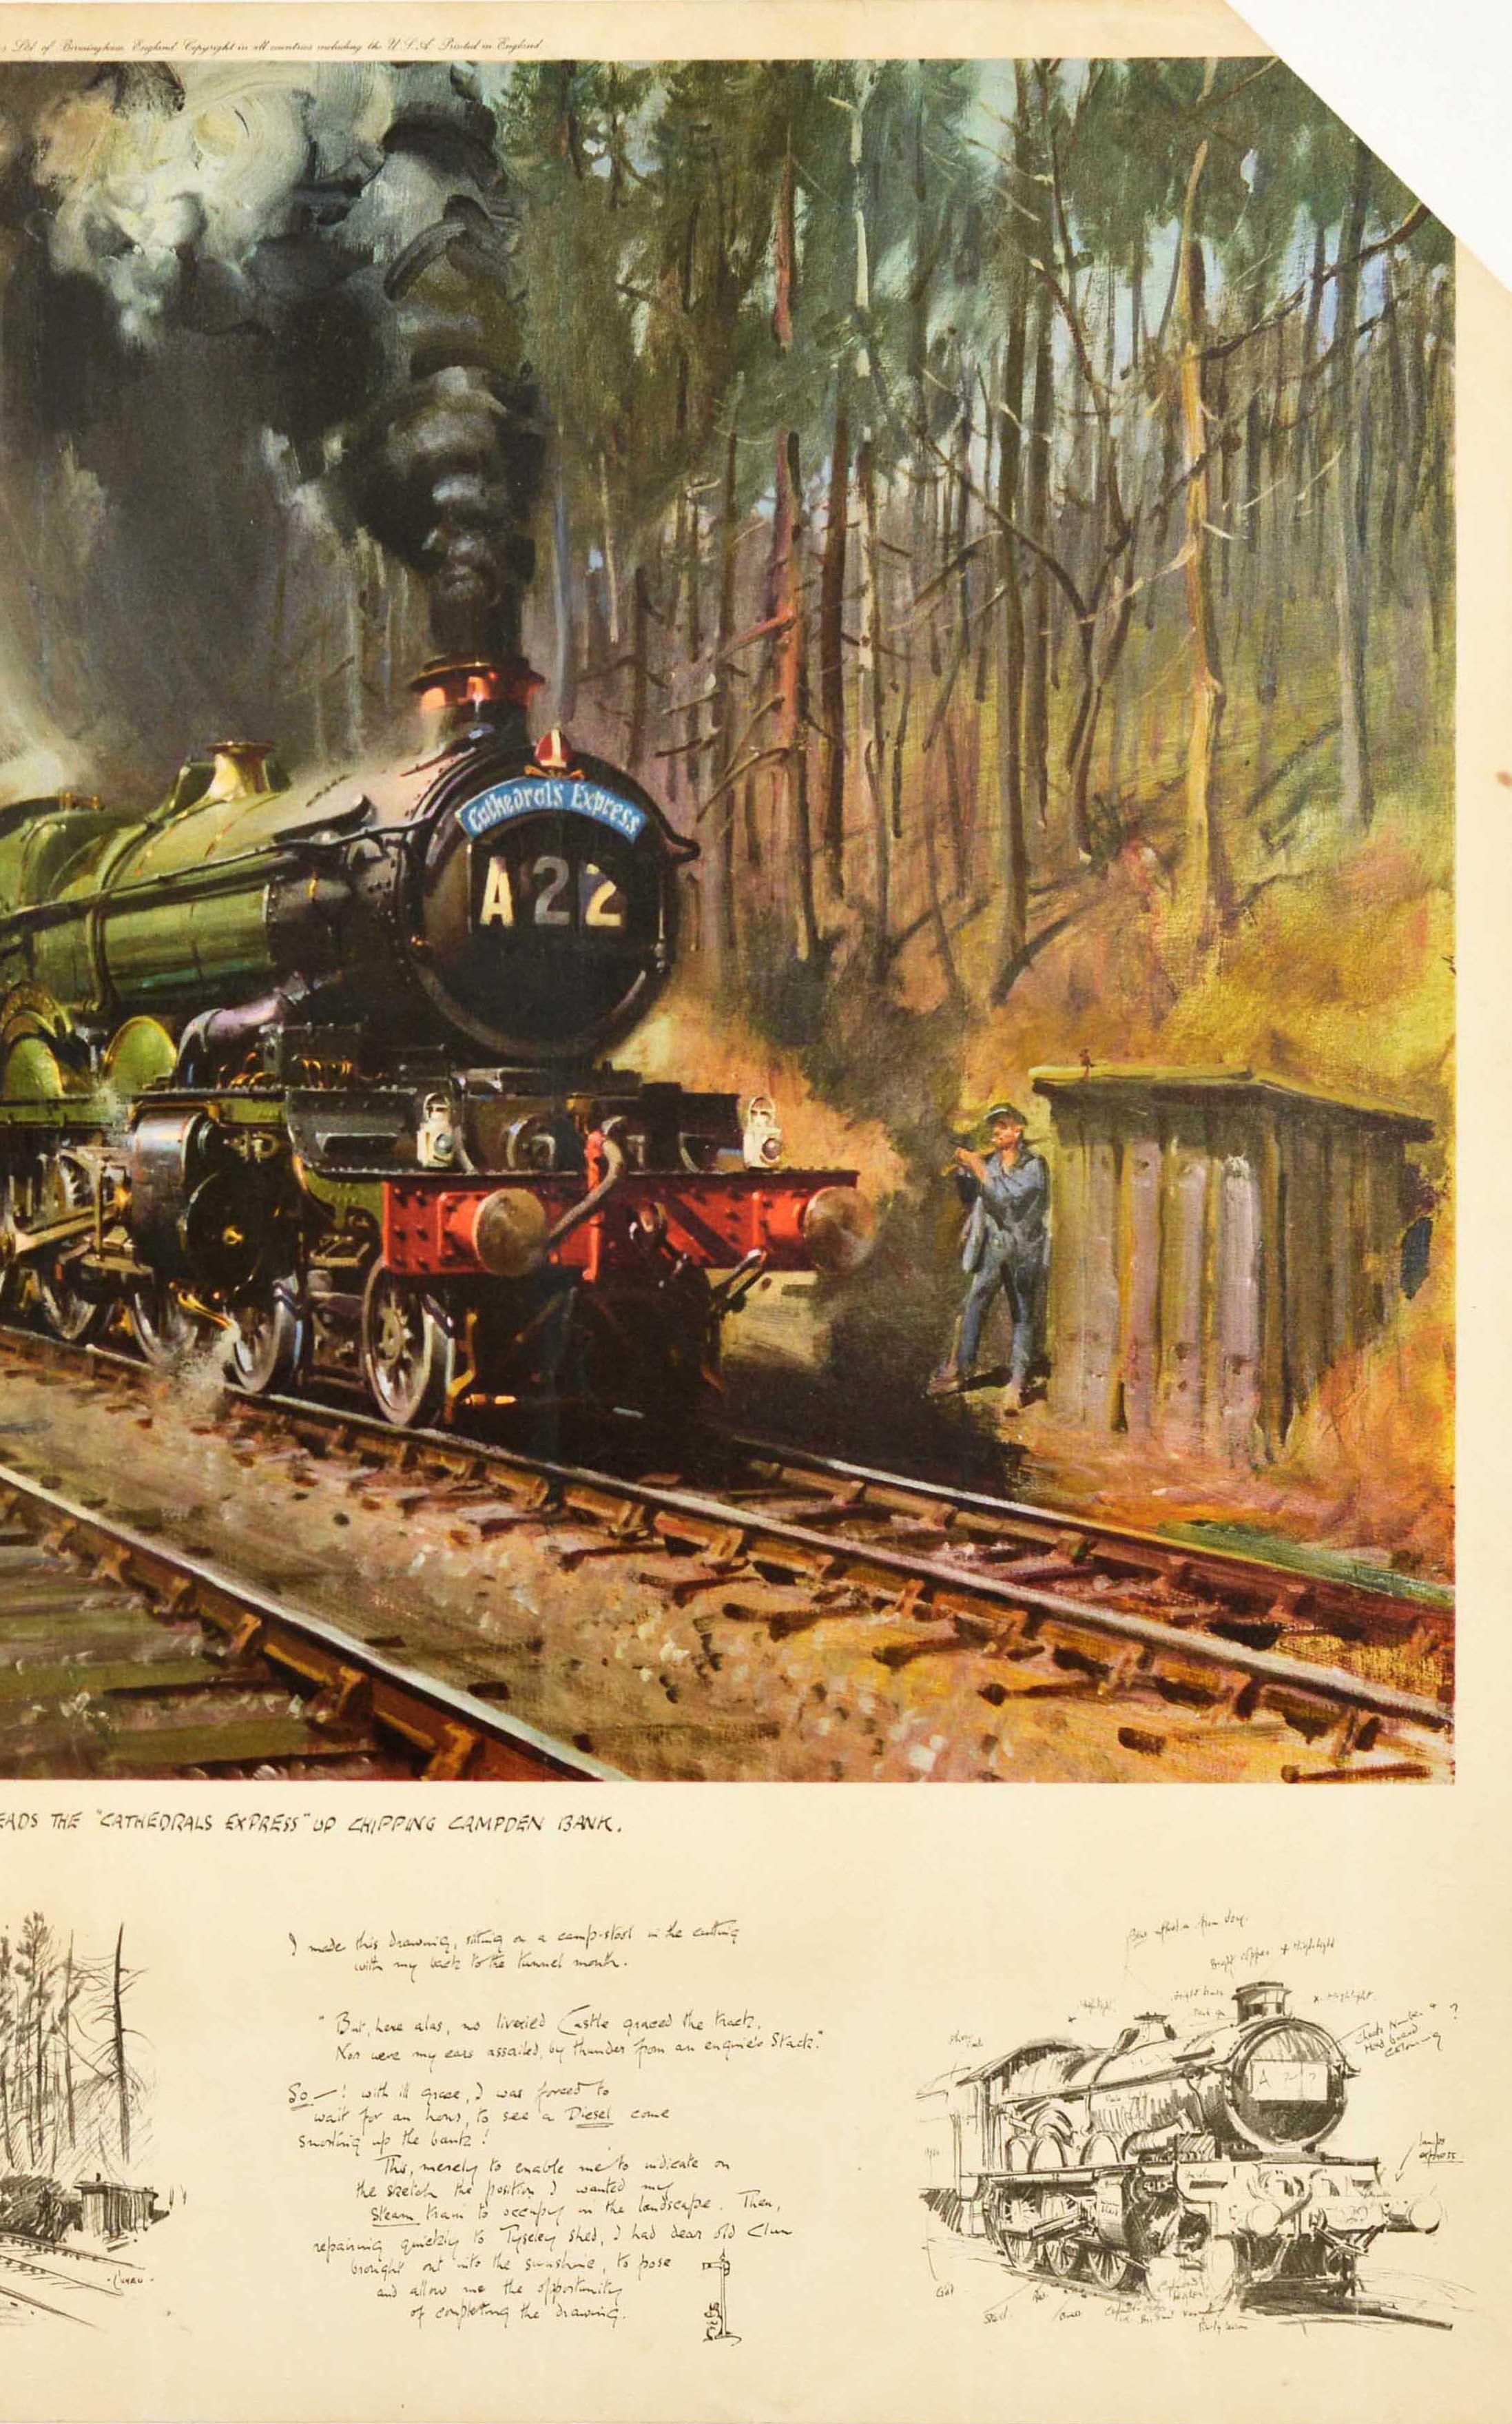 Original vintage travel poster - A Thoroughbred Heads The 'Cathedrals Express' Up Chipping Campden Bank - featuring artwork by the notable British artist Terence Tenison Cuneo (1907-1996) of the Cathedrals Express train with a bishop's mitre crest